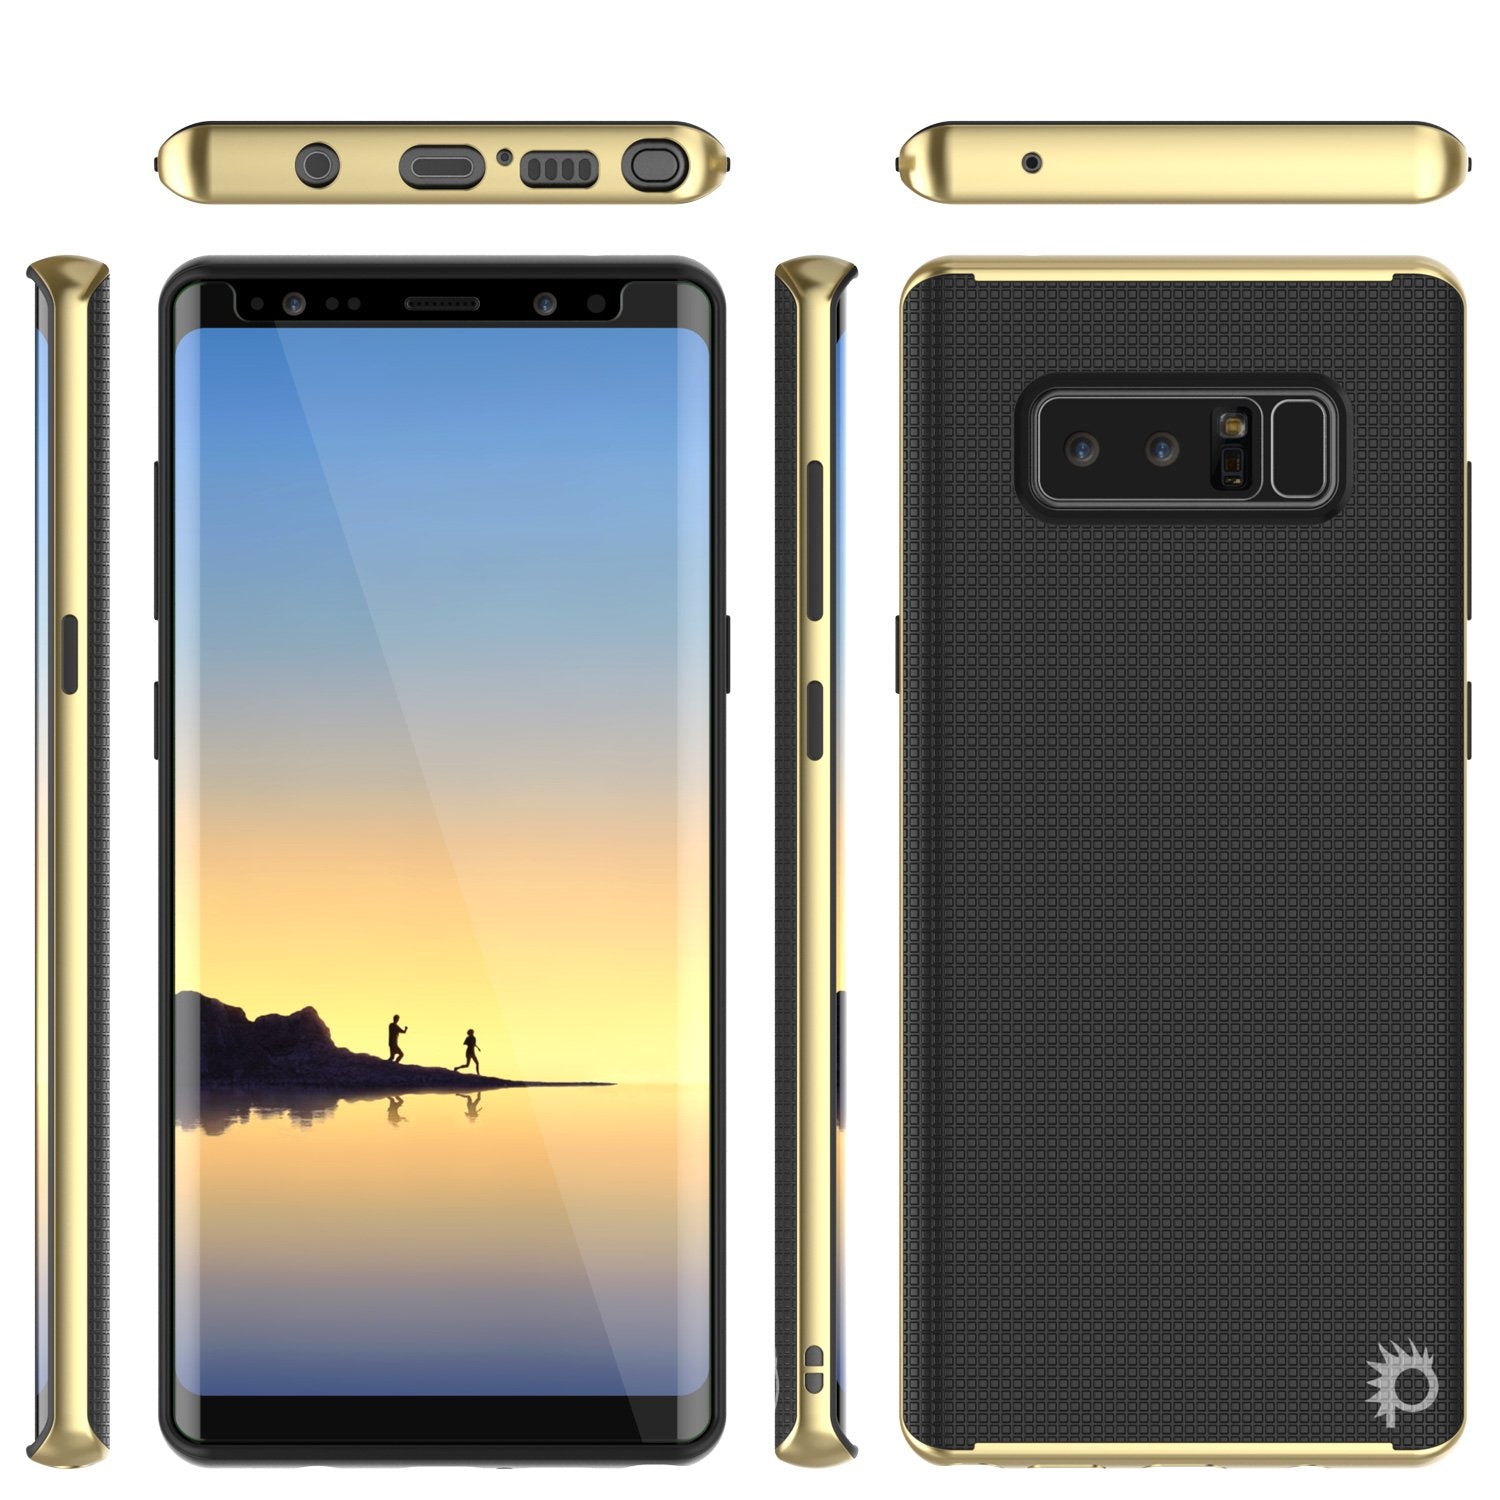 Galaxy Note 8 Screen/Shock Protective Dual Layer Case [Gold]